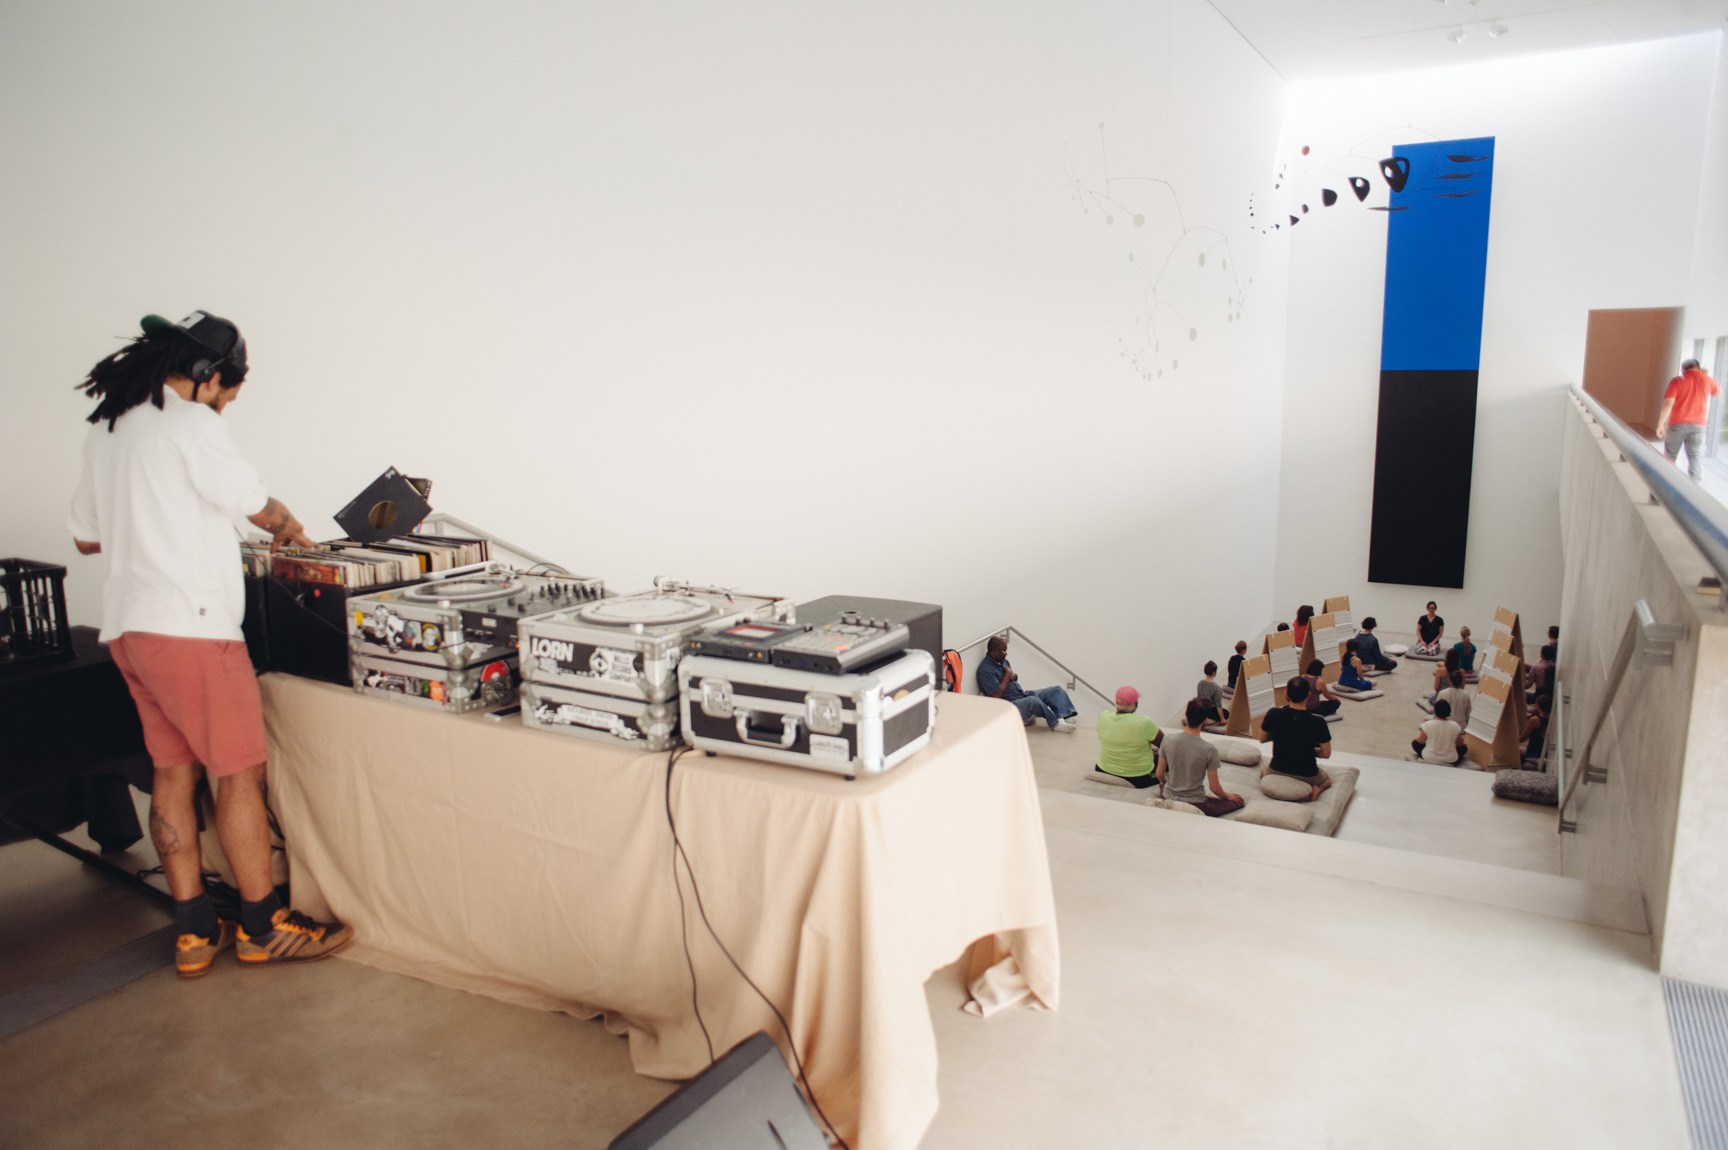 A view of Angela Malchionno leading participants in meditation in front of "Blue Black" by Ellsworth Kelly. A DJ sorts through records in the Main Gallery behind them.